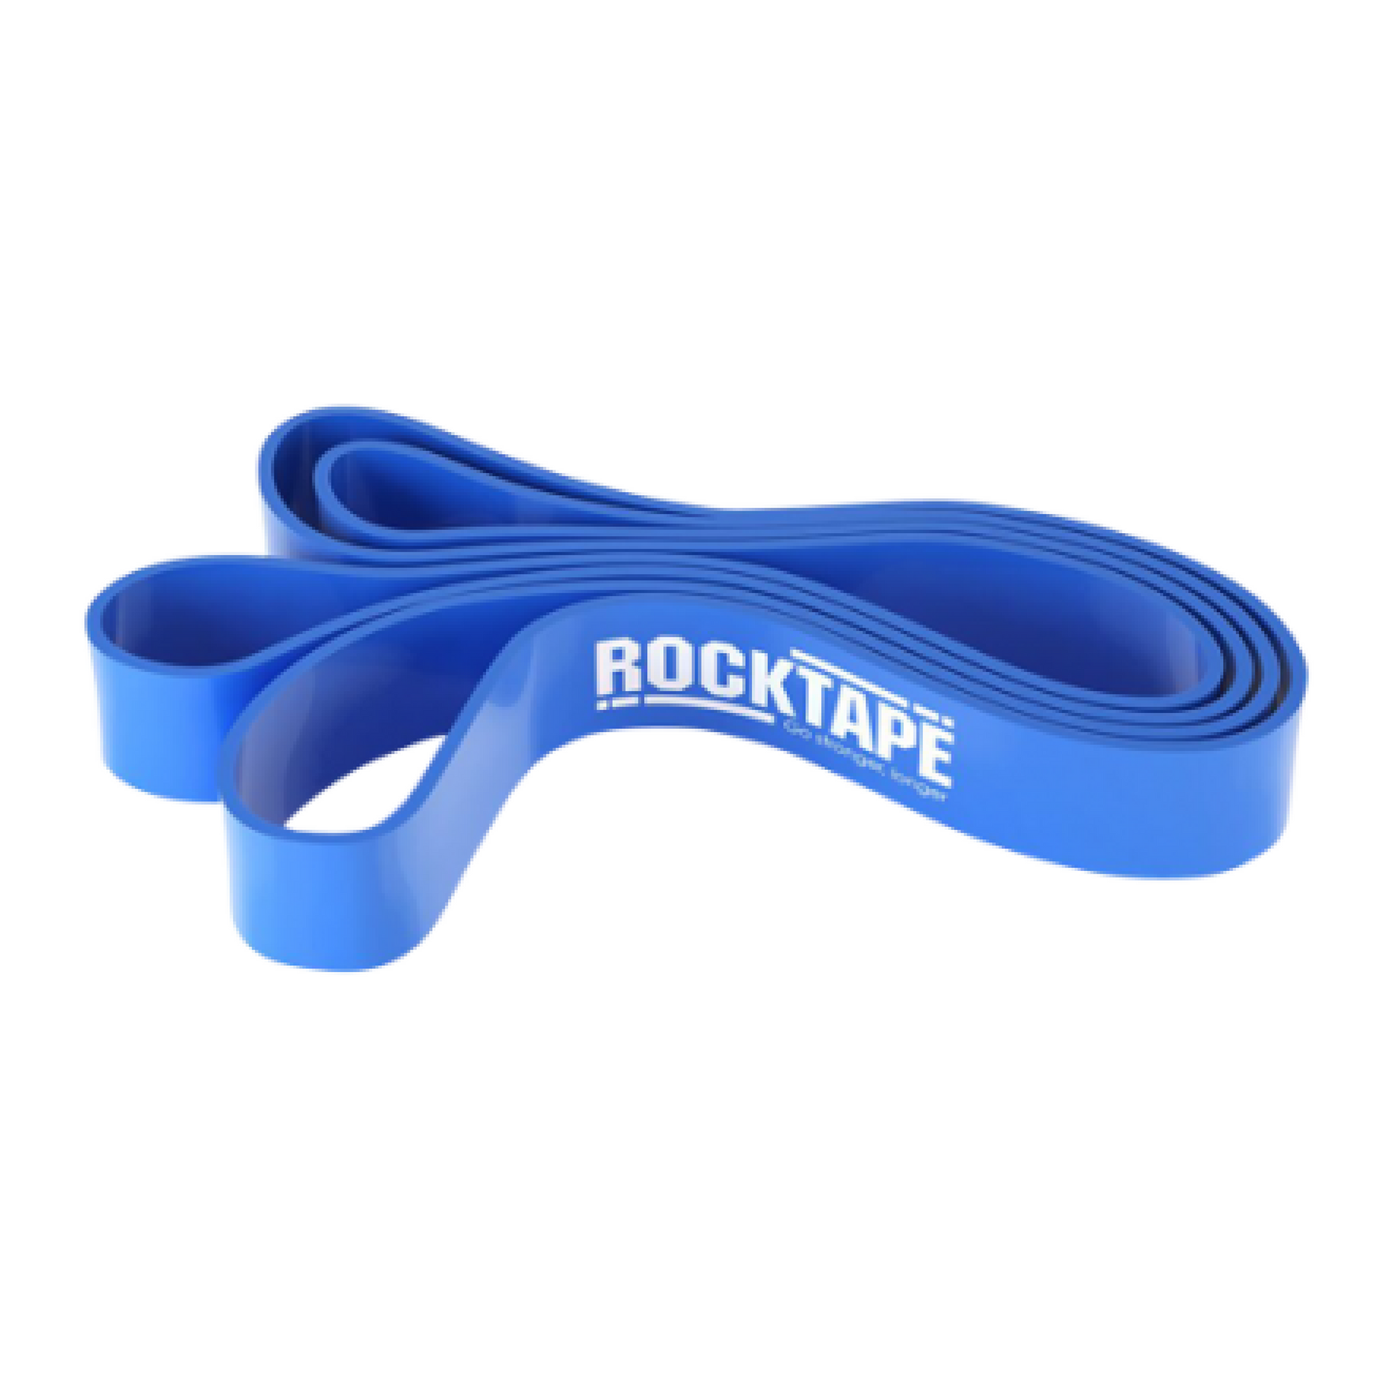 Rockband Blue Extra Heavy - product only